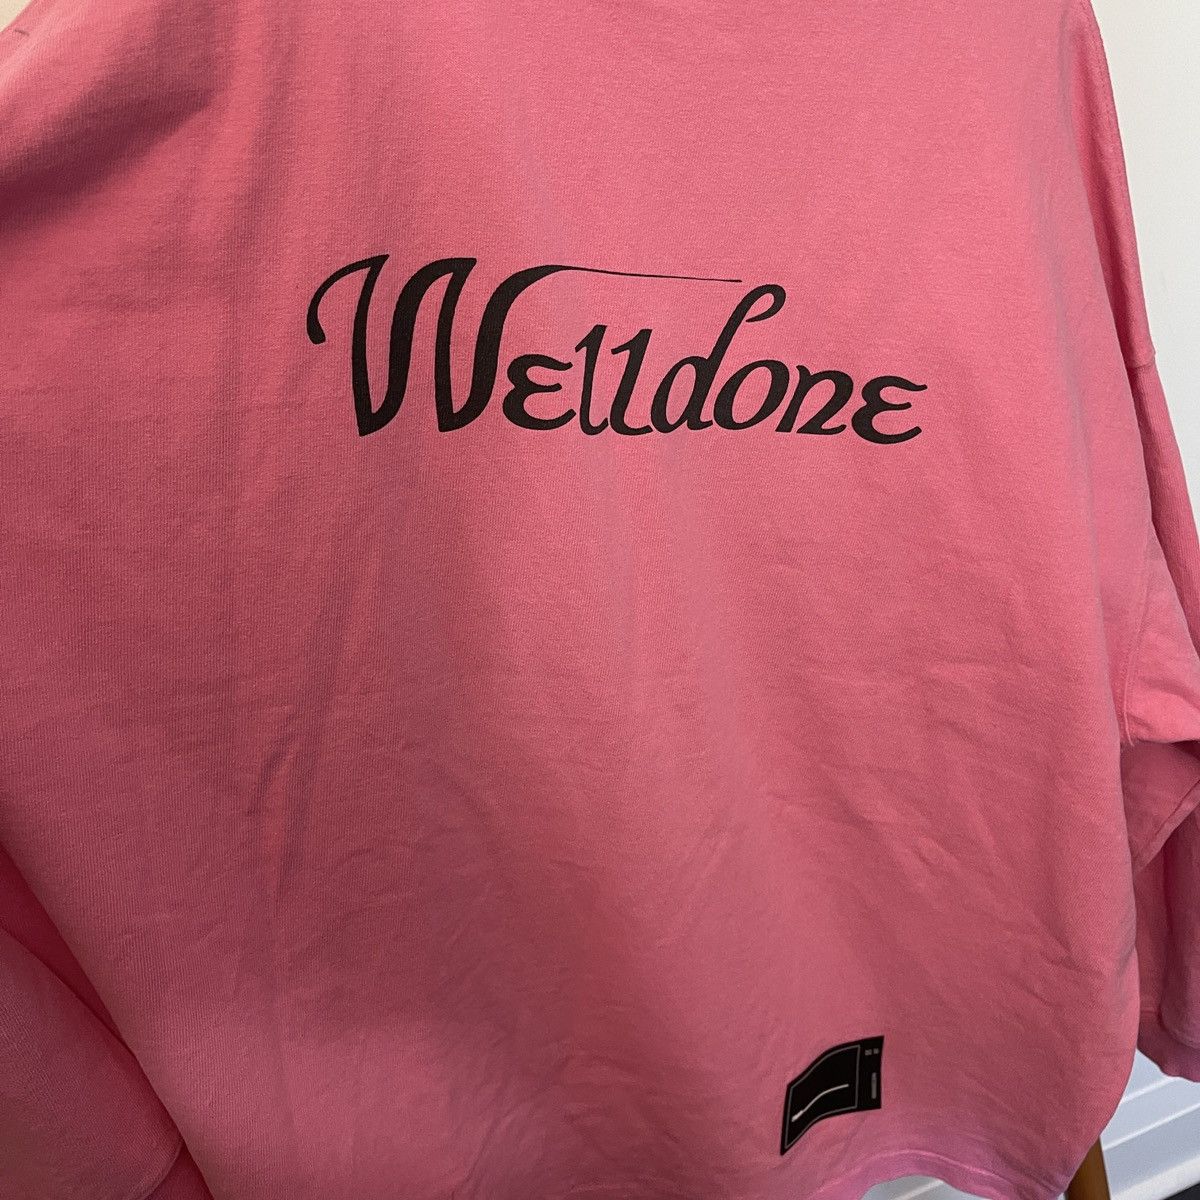 WE11DONE We11done welldone pink logo print long sleeve shirt one size Size ONE SIZE - 3 Thumbnail